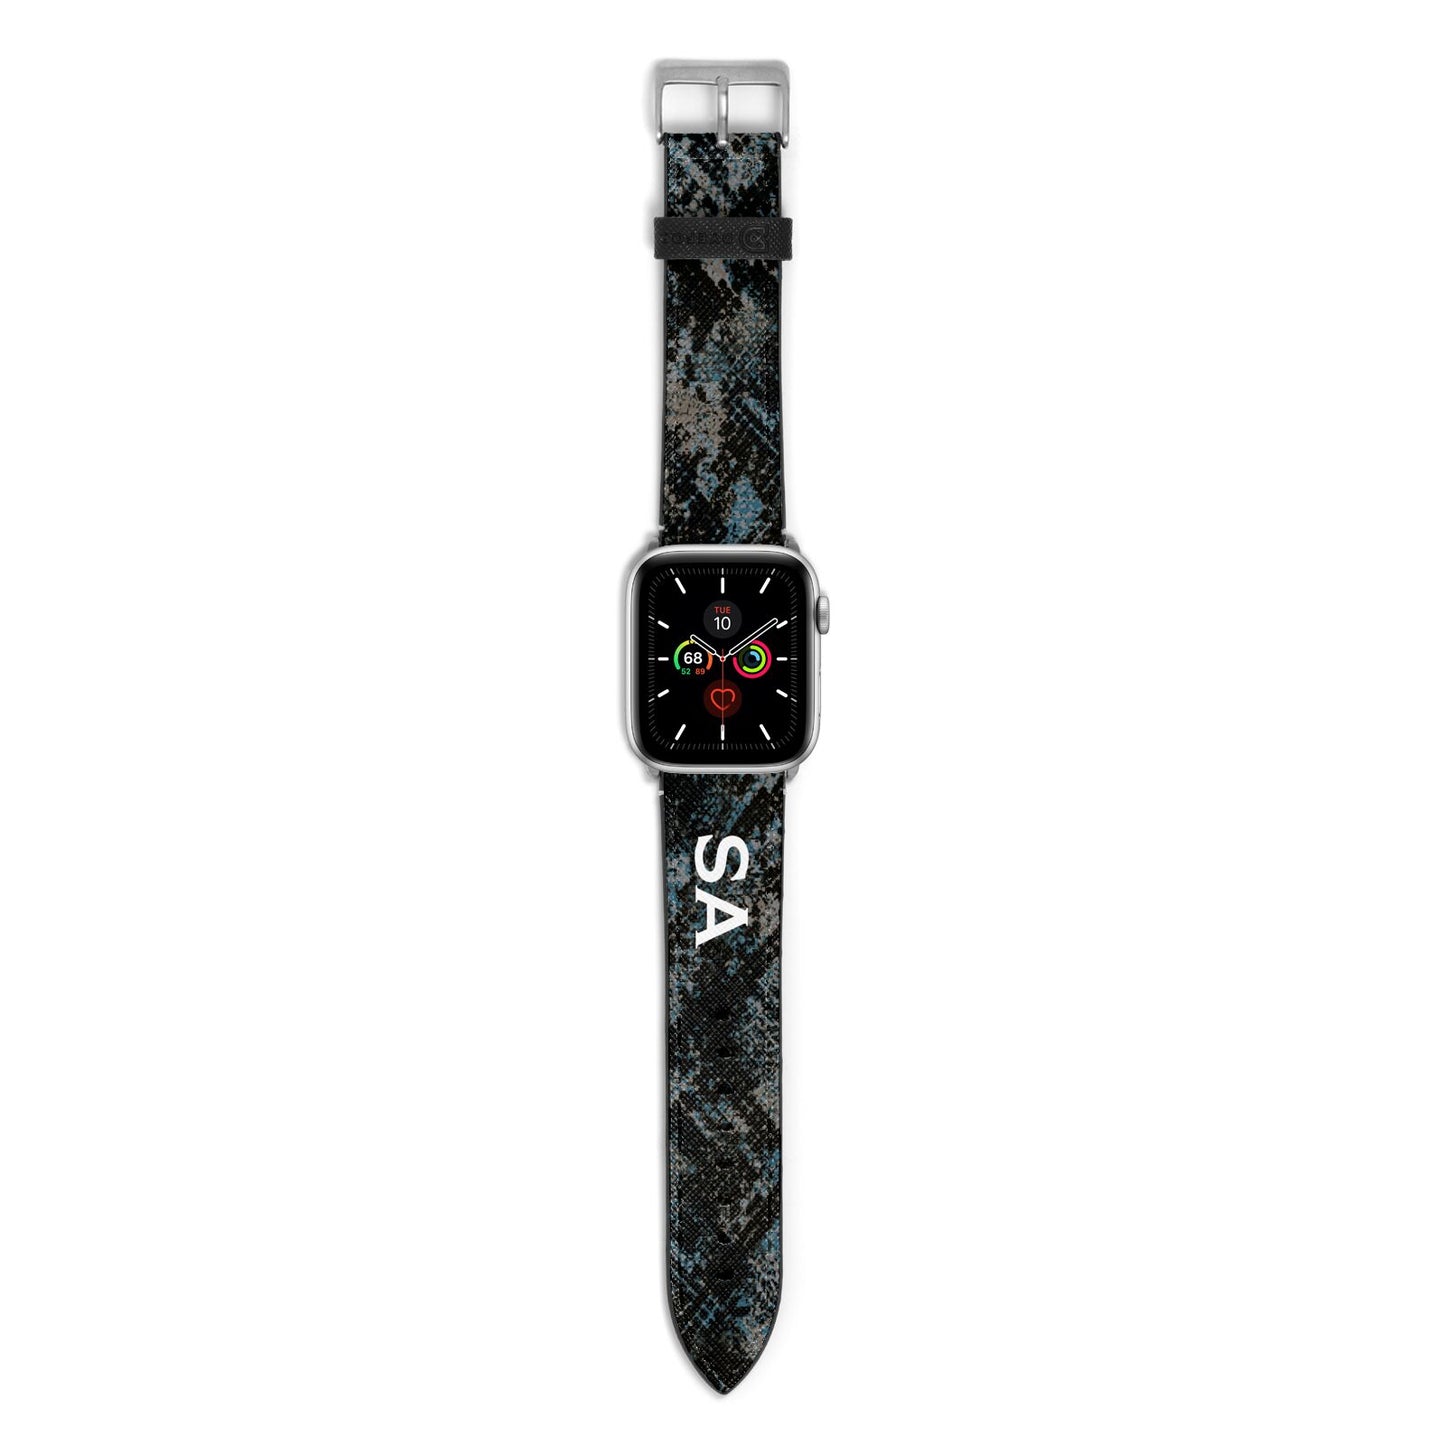 Personalised Snakeskin Effect Apple Watch Strap with Silver Hardware